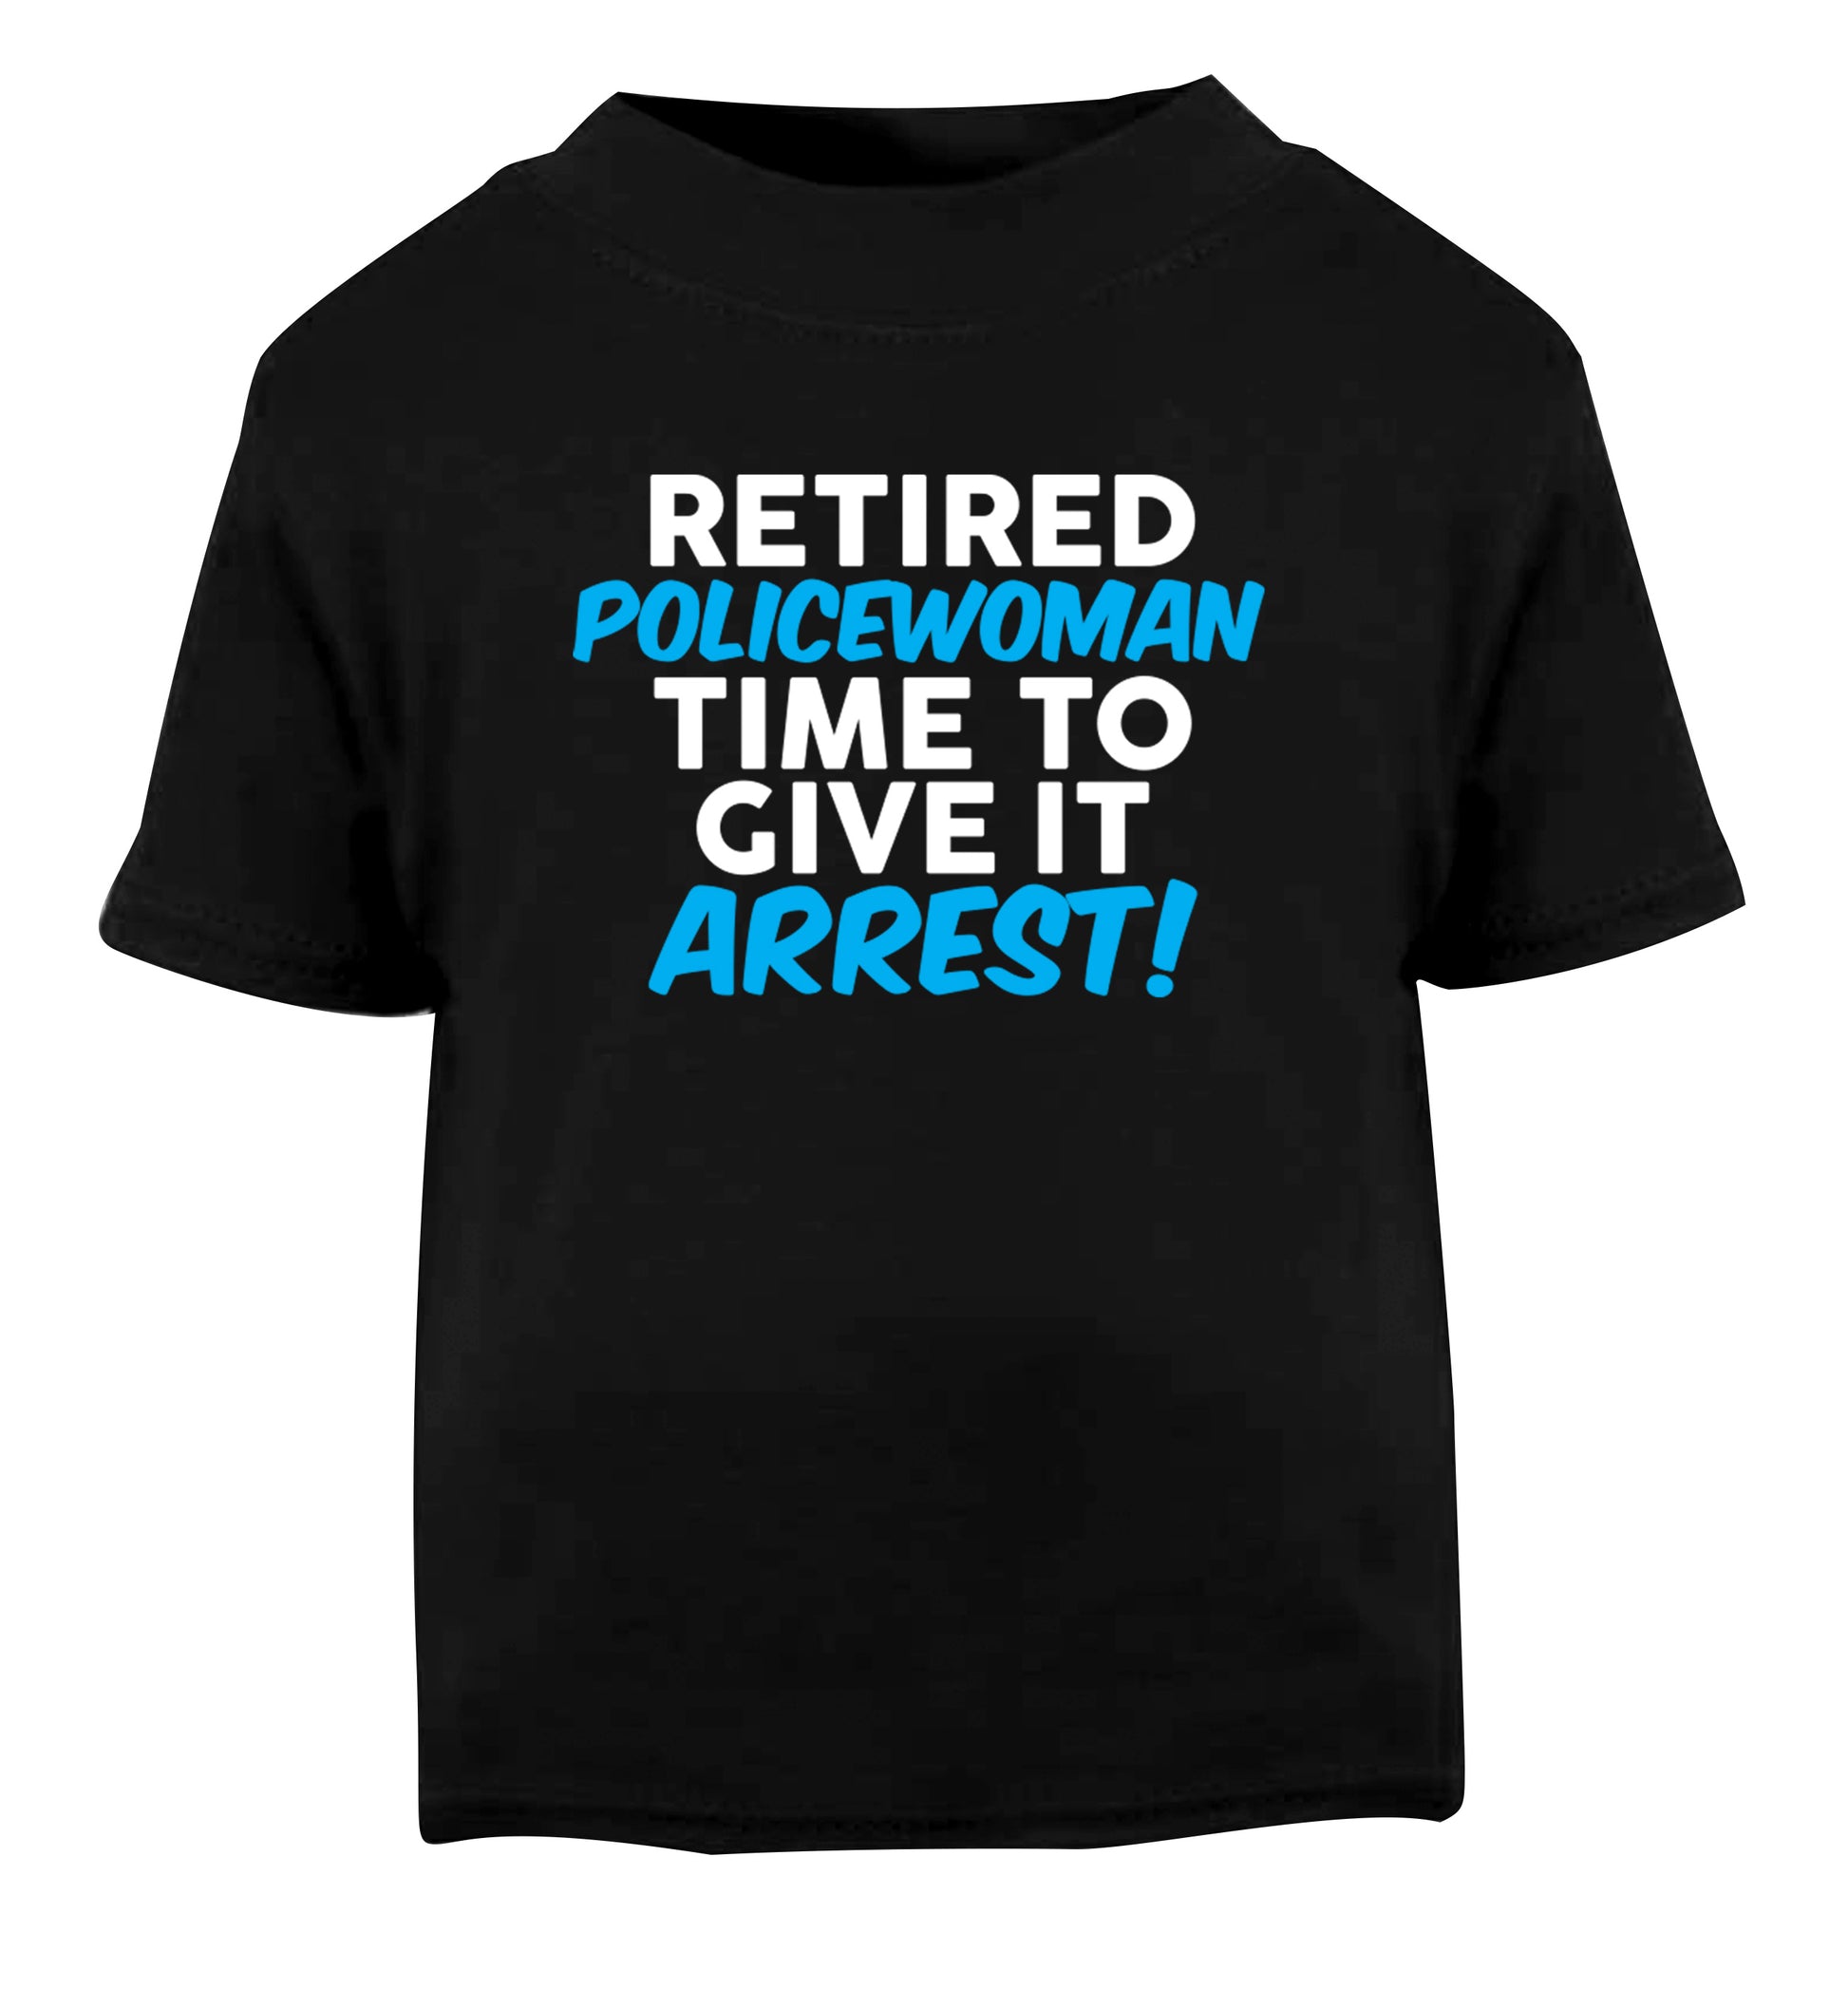 Retired policewoman time to give it arrest Black Baby Toddler Tshirt 2 years